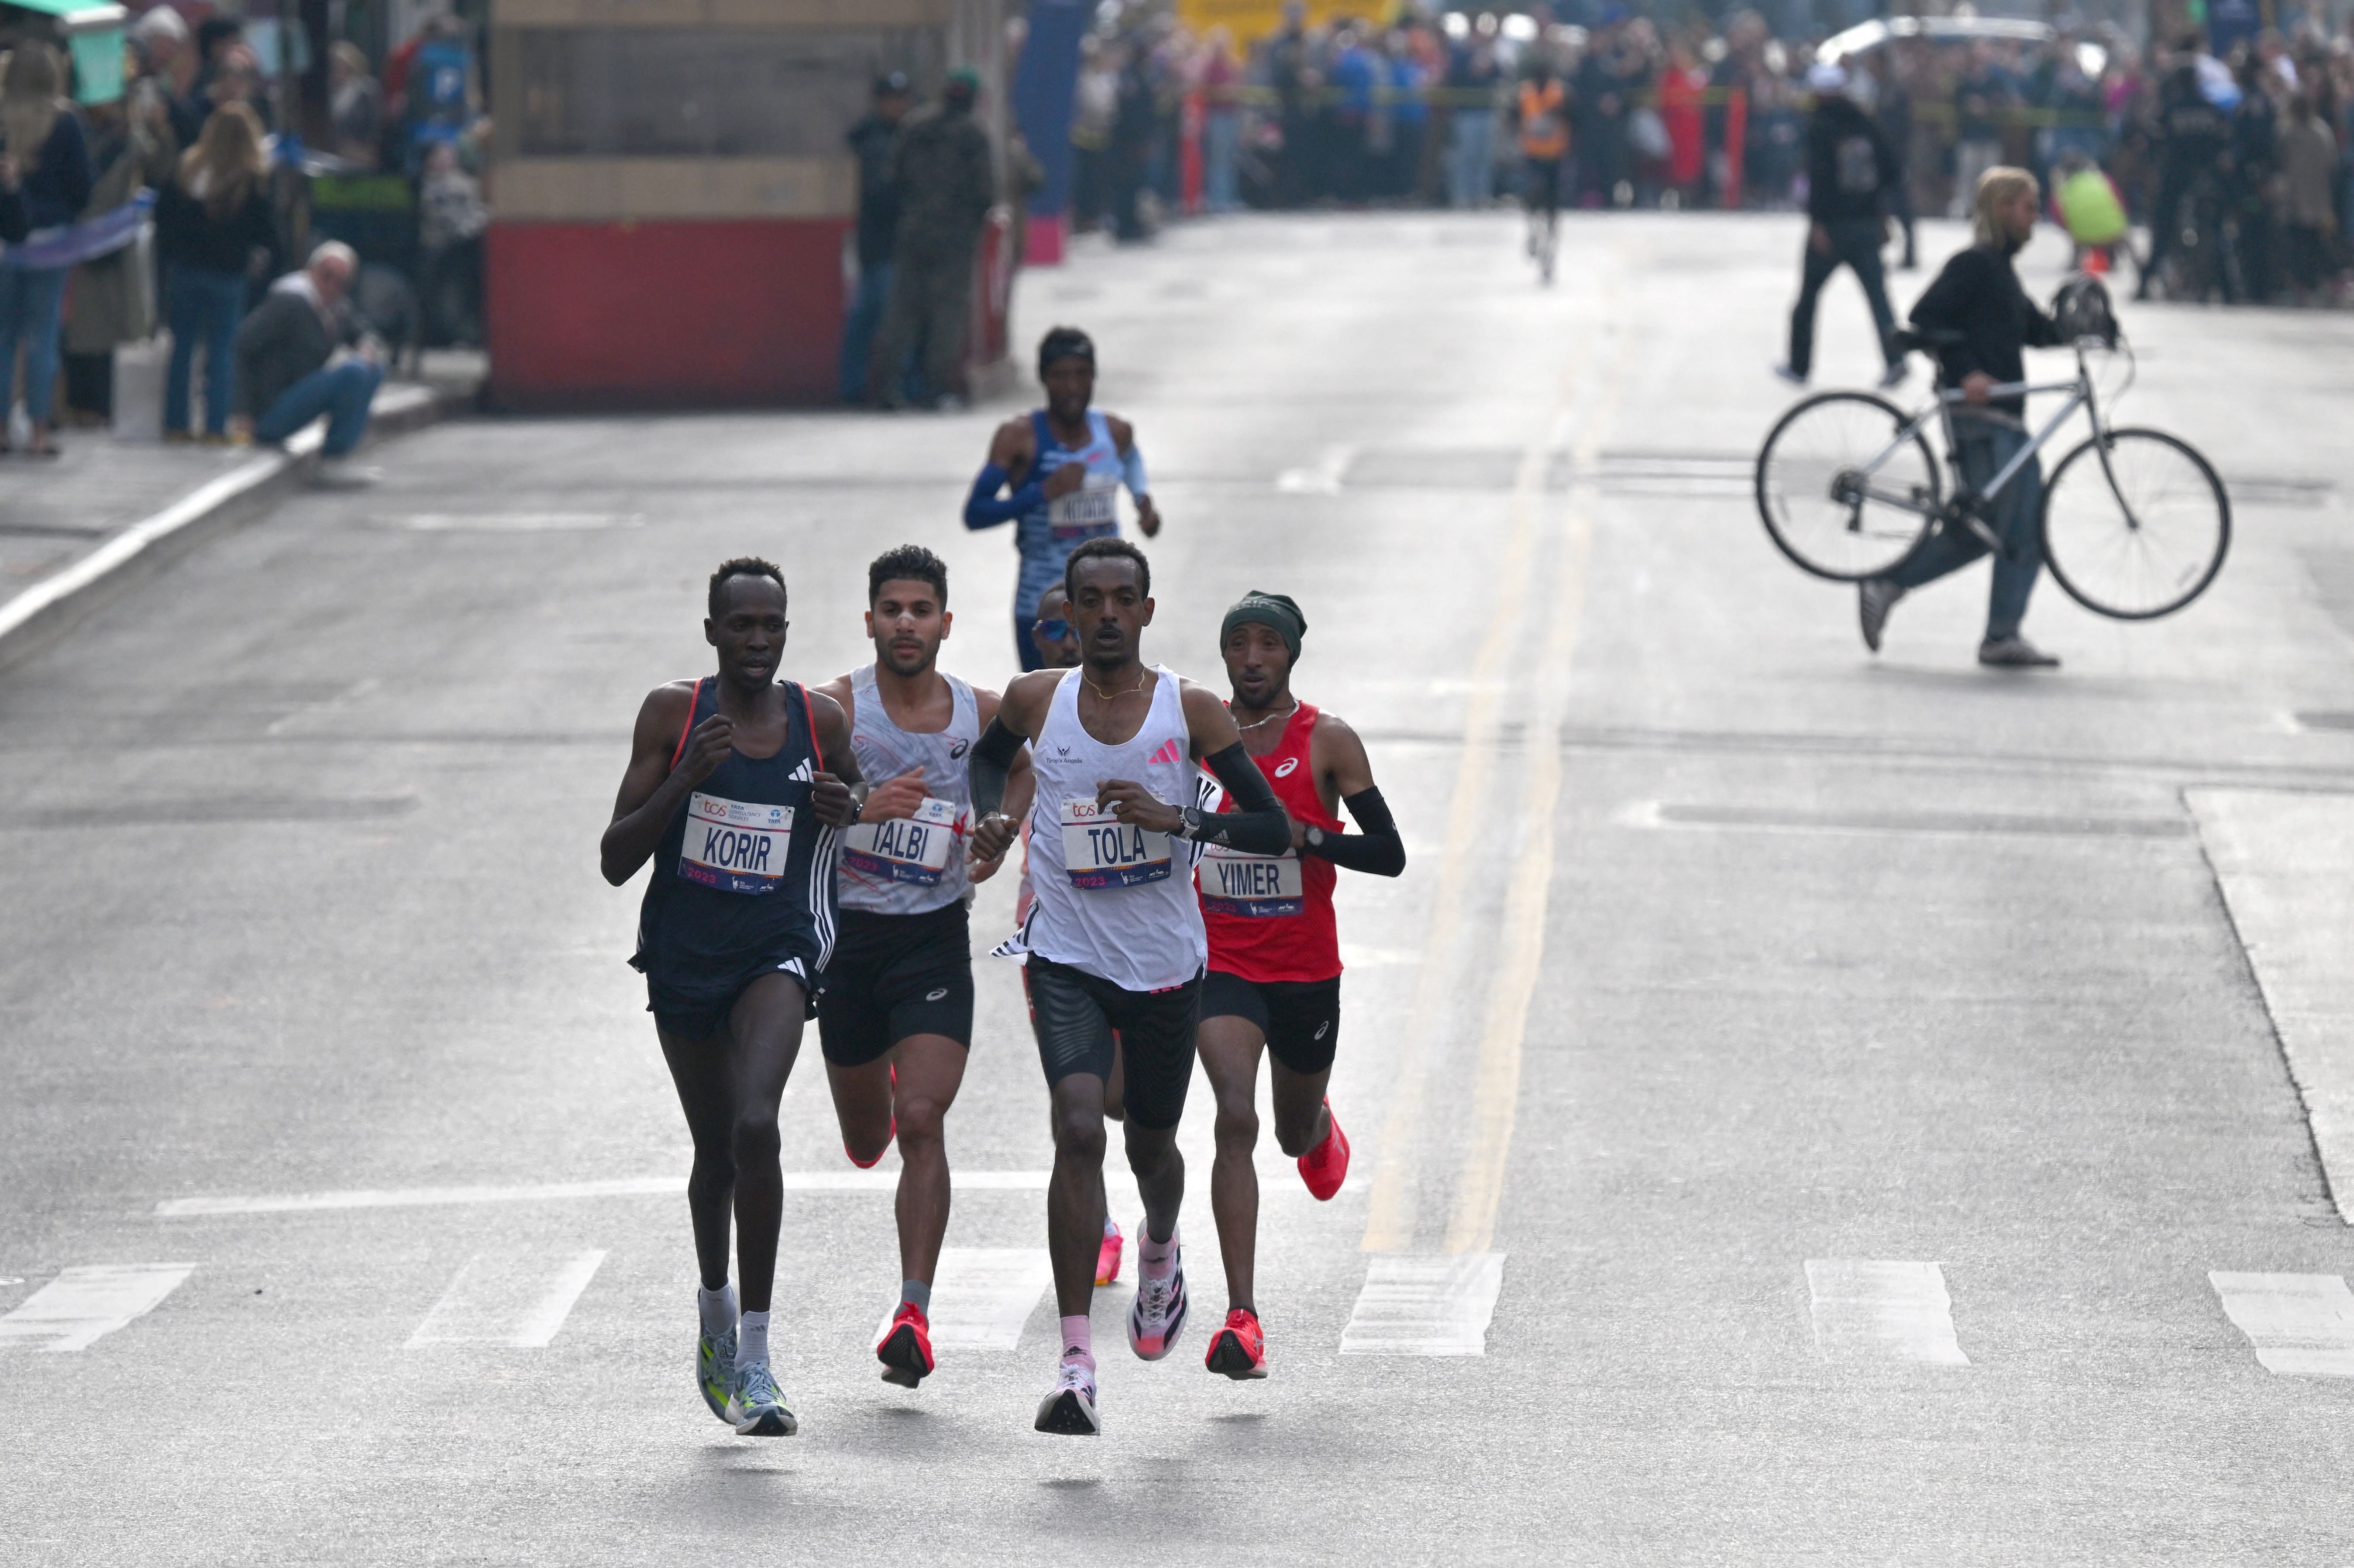 Tamirat Tola in the lead pack, on his way to New York City Marathon victory